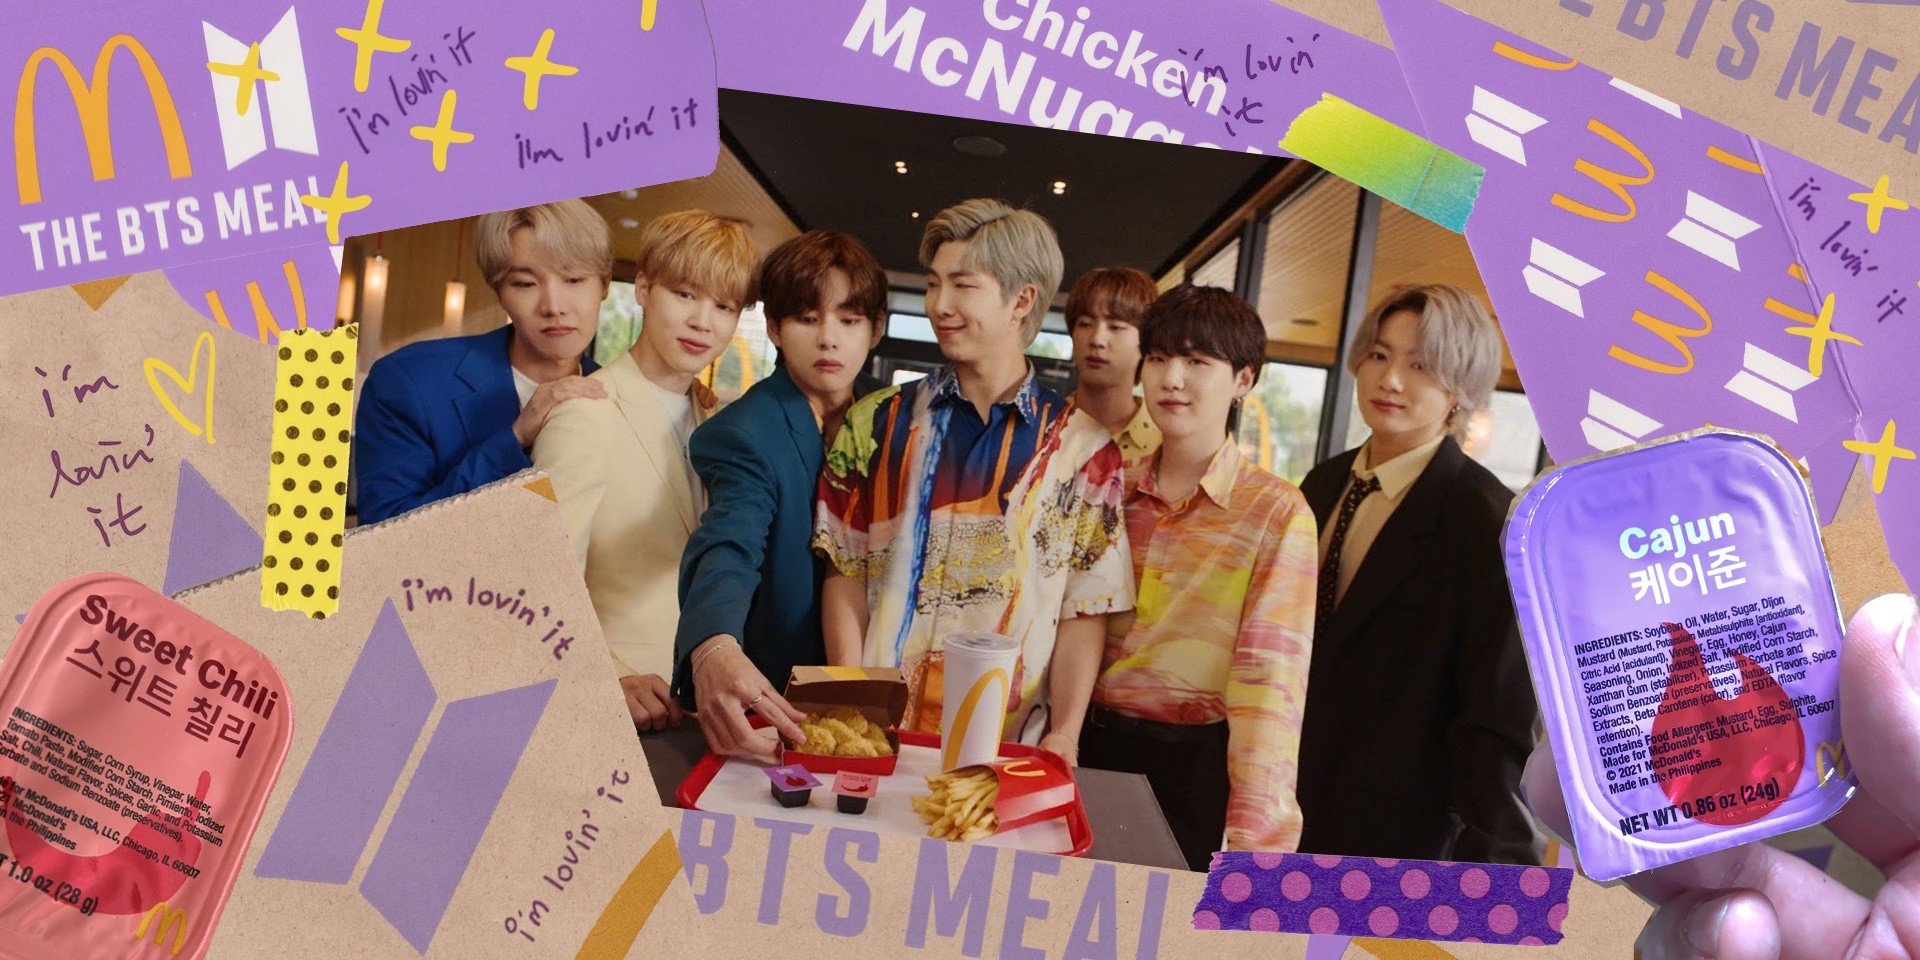 Filipino fans share their BTS Meal experience, sauce bias, and more